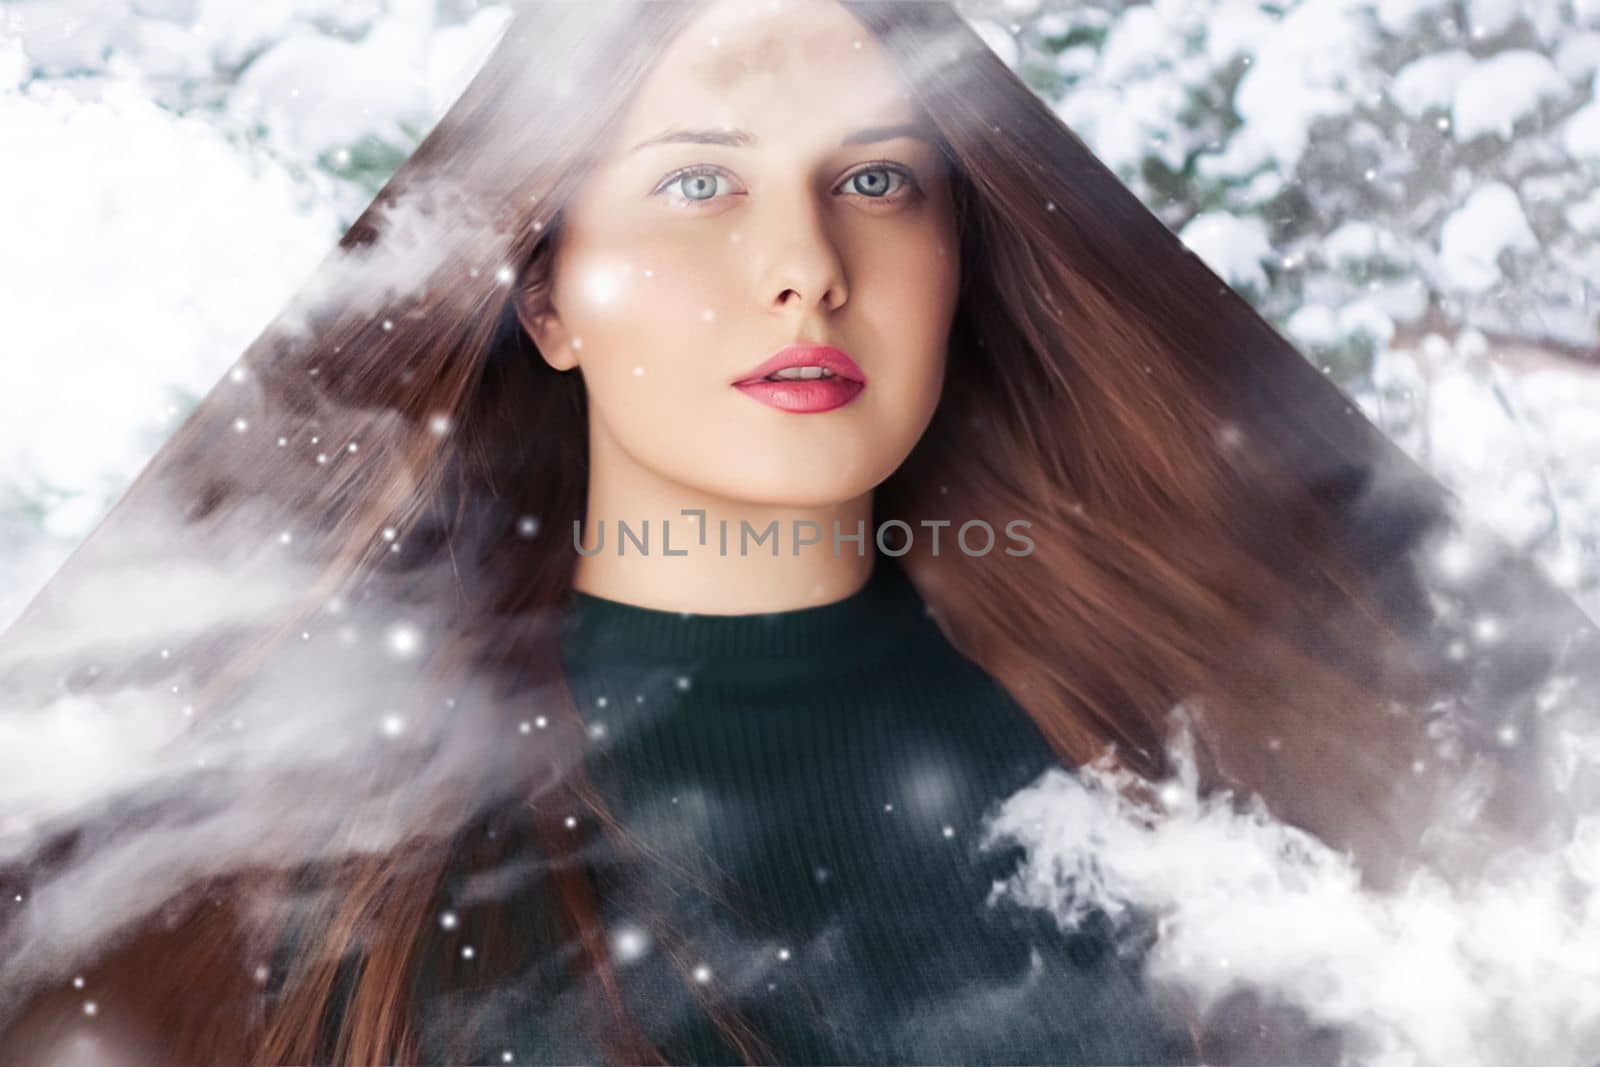 Winter beauty, Christmas time and happy holidays, beautiful woman with long hairstyle and natural make-up in snowy forest, snowing snow design as xmas, New Year and holiday lifestyle portrait by Anneleven